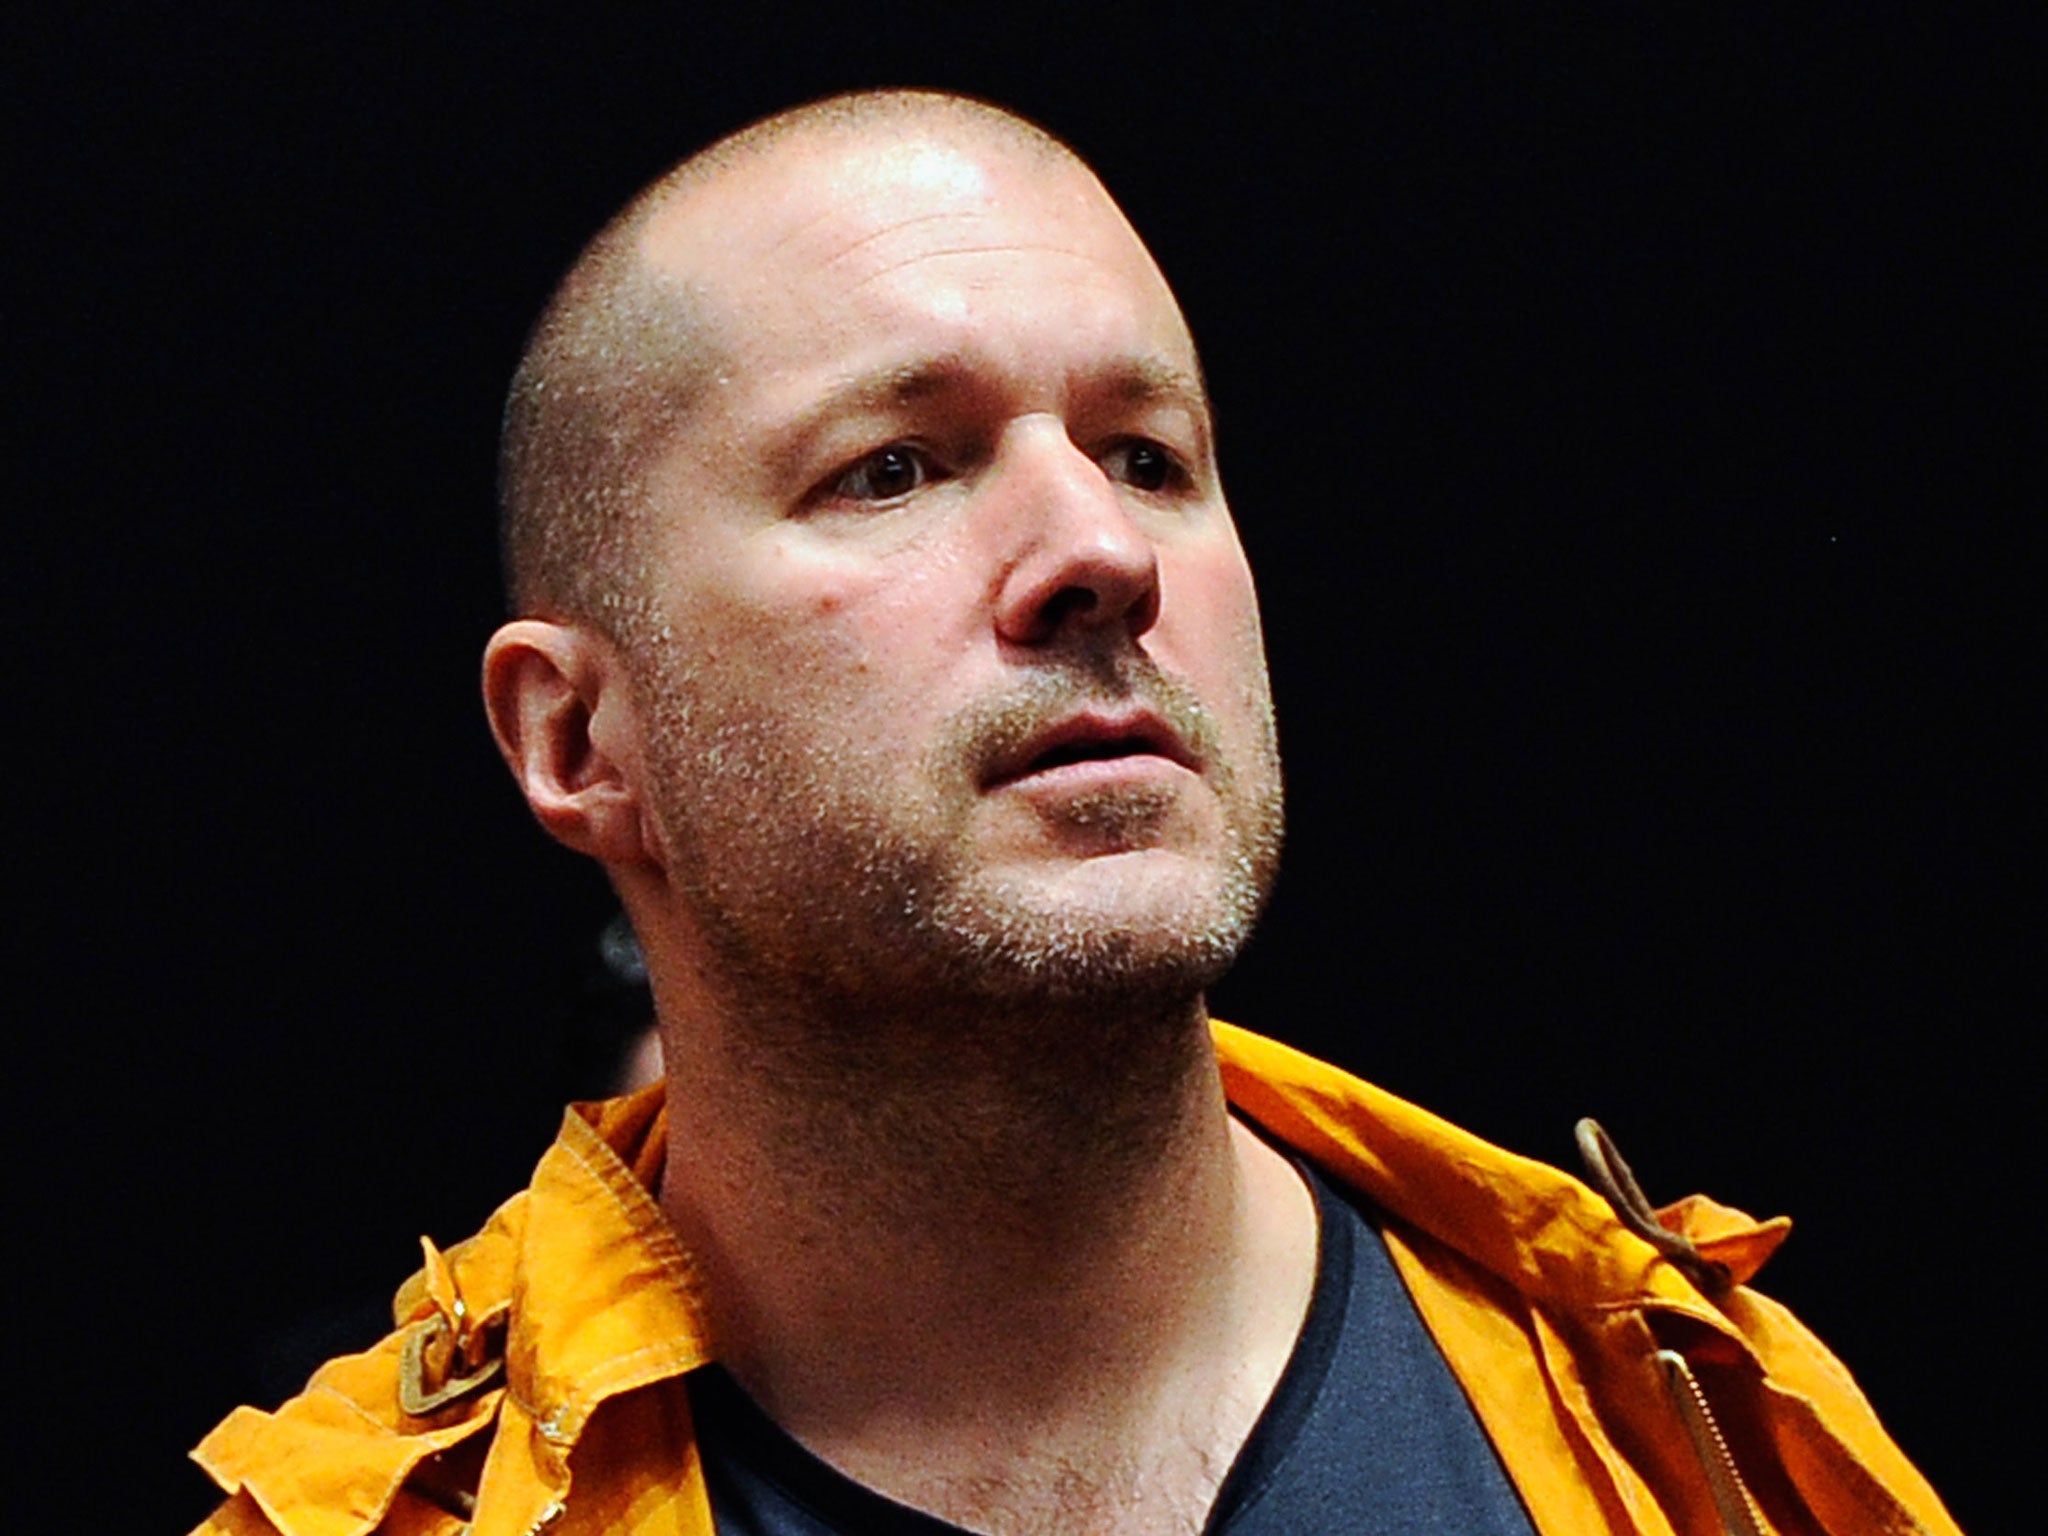 Senior vice president of industrial design for Apple Inc., Jonathan Ive, during an Apple product launch event in 2012.